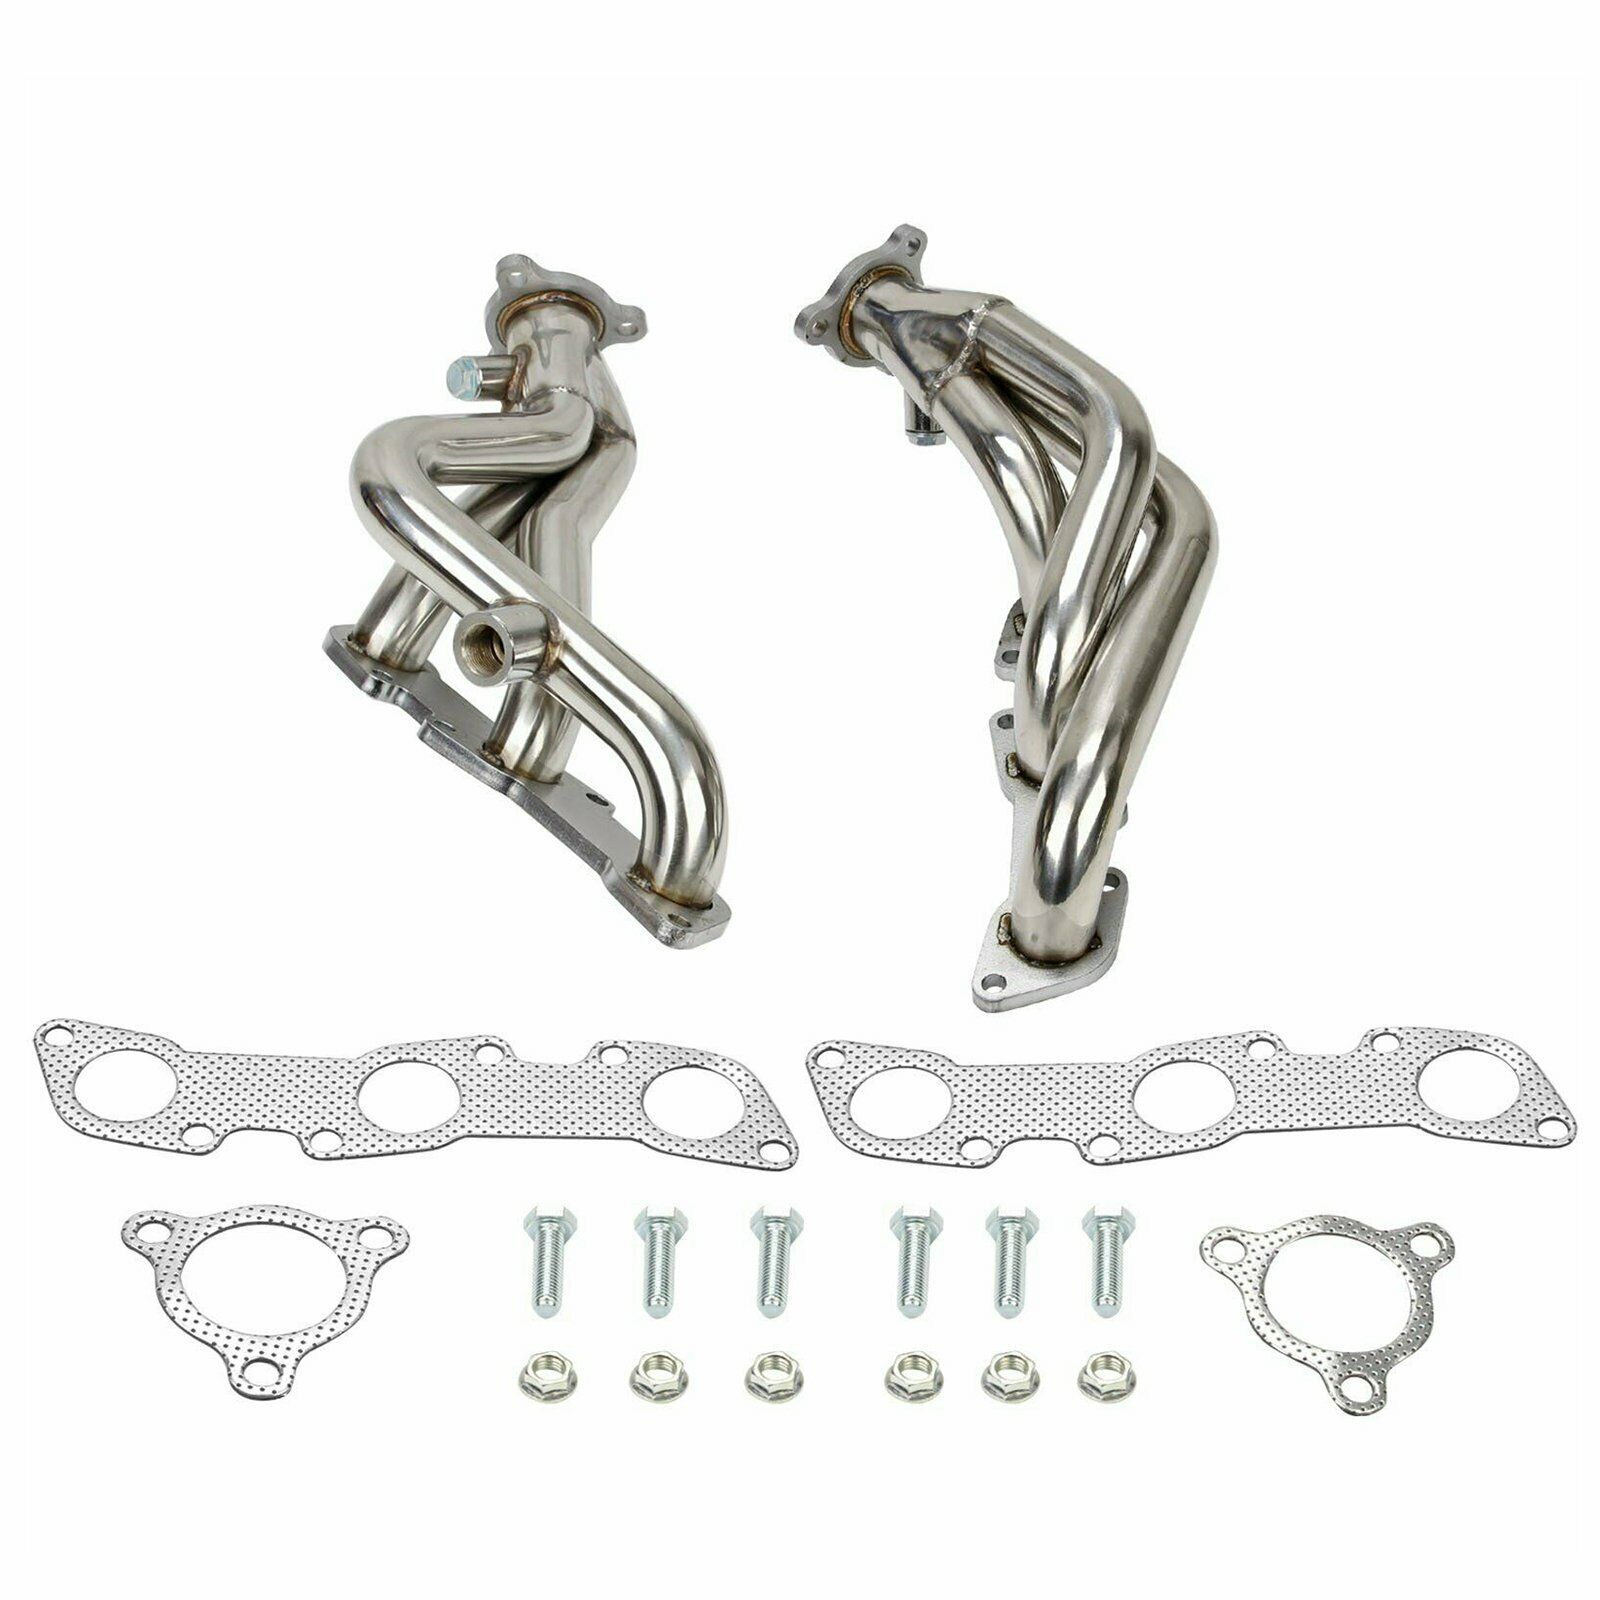 Performance Exhaust Manifold Headers for 98-04 Nissan Frontier Pathfinder V6